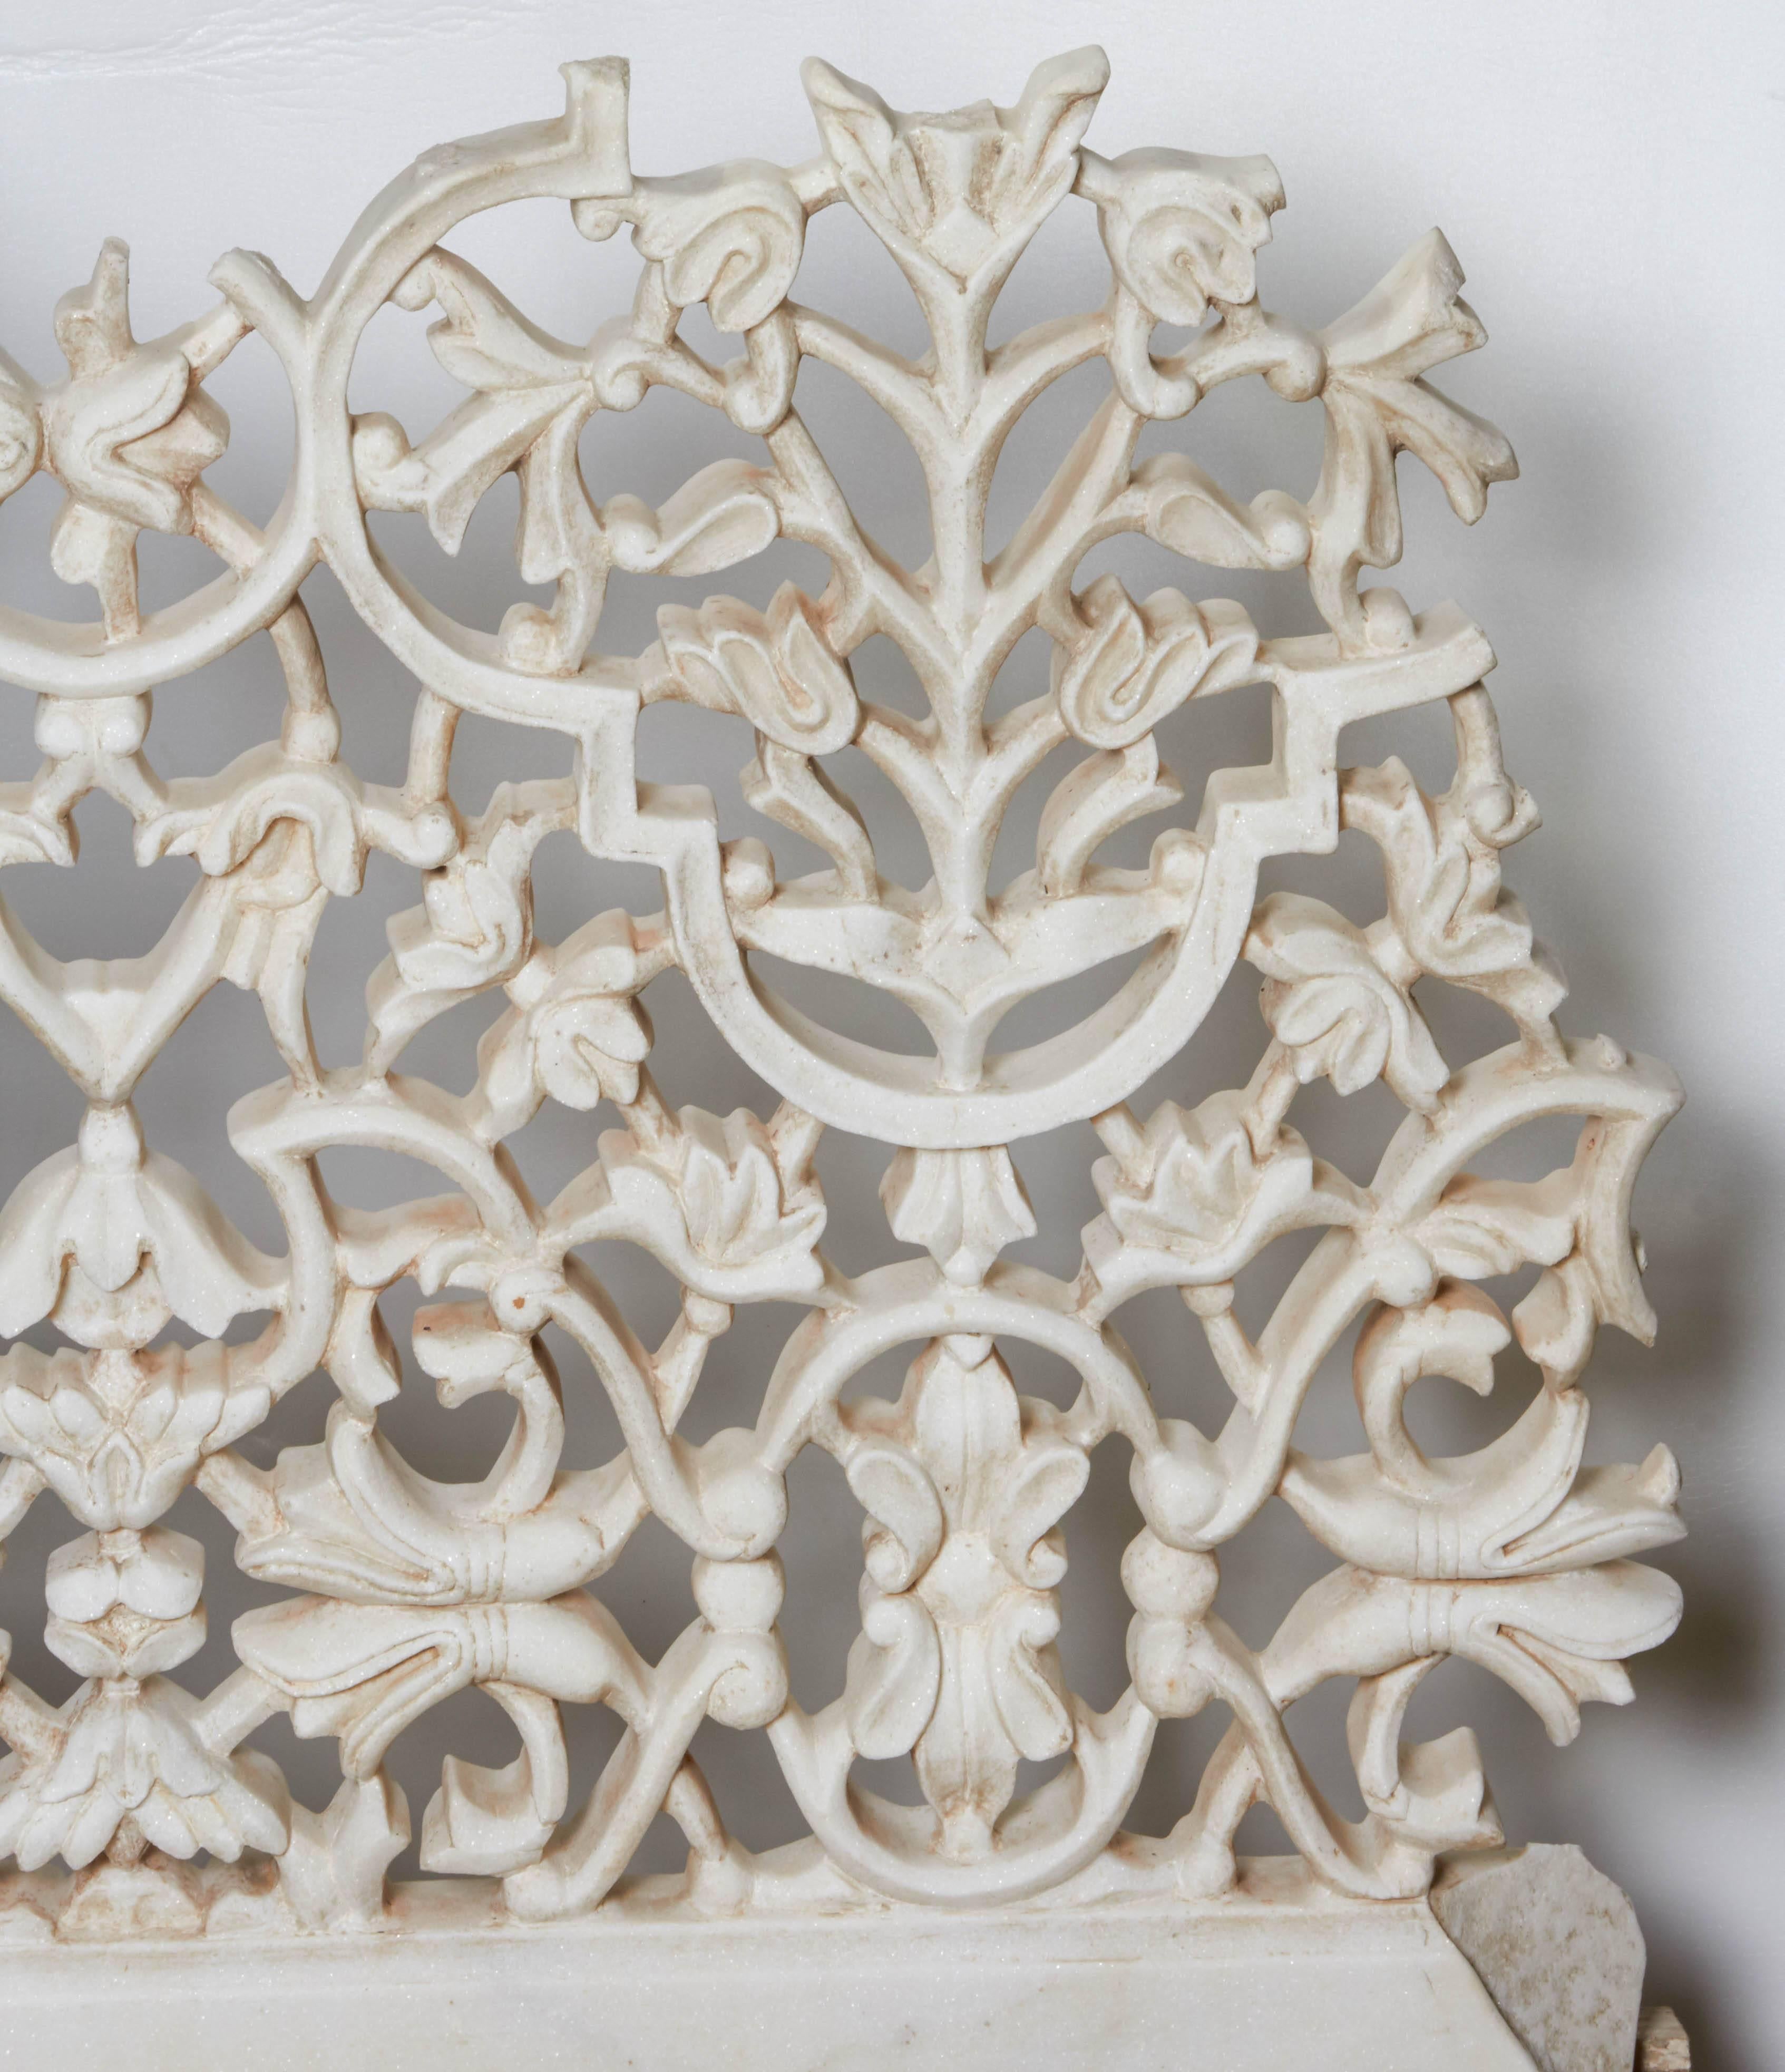 A beautiful white marble fragment of a Classic jali screen lattice from India, with an intricate floral pattern, mounted on a wood base.